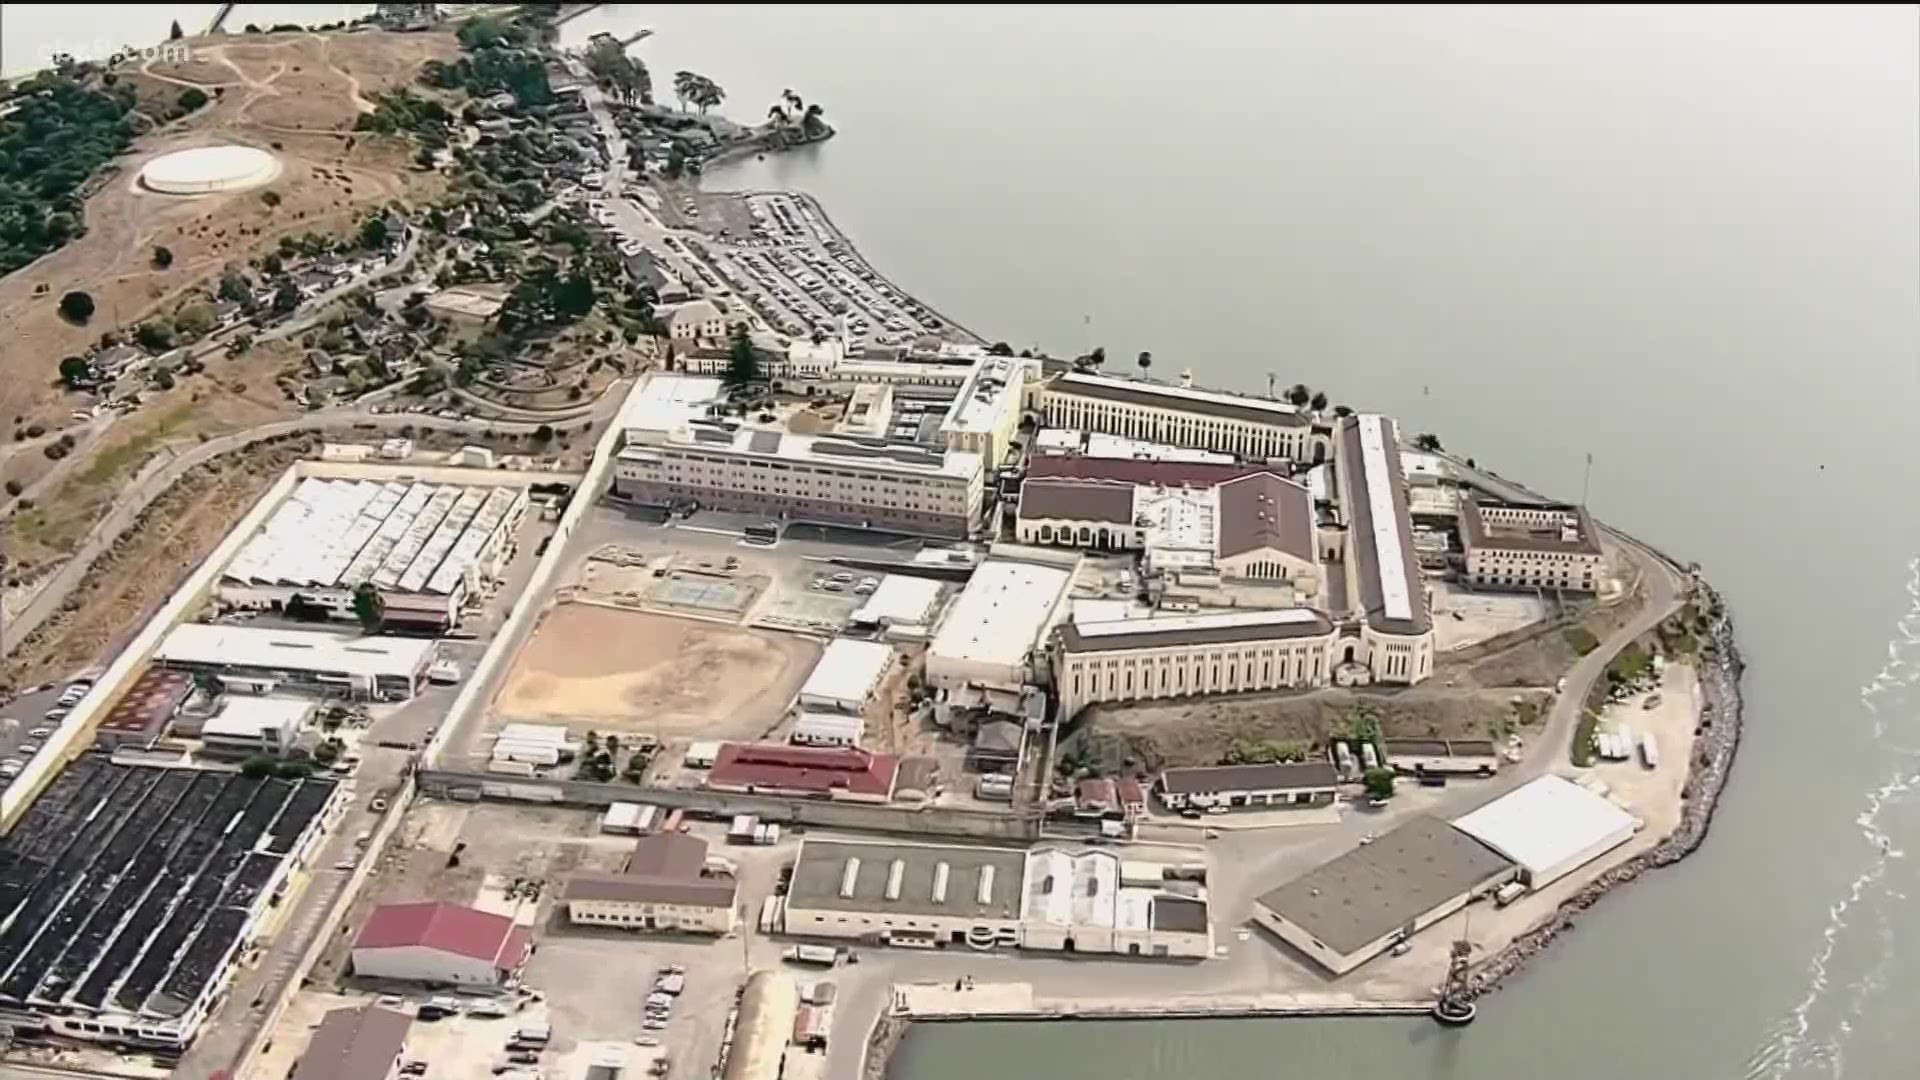 Among all of the prisons statewide, San Quentin is at the top of the list with the most COVID-19 cases.